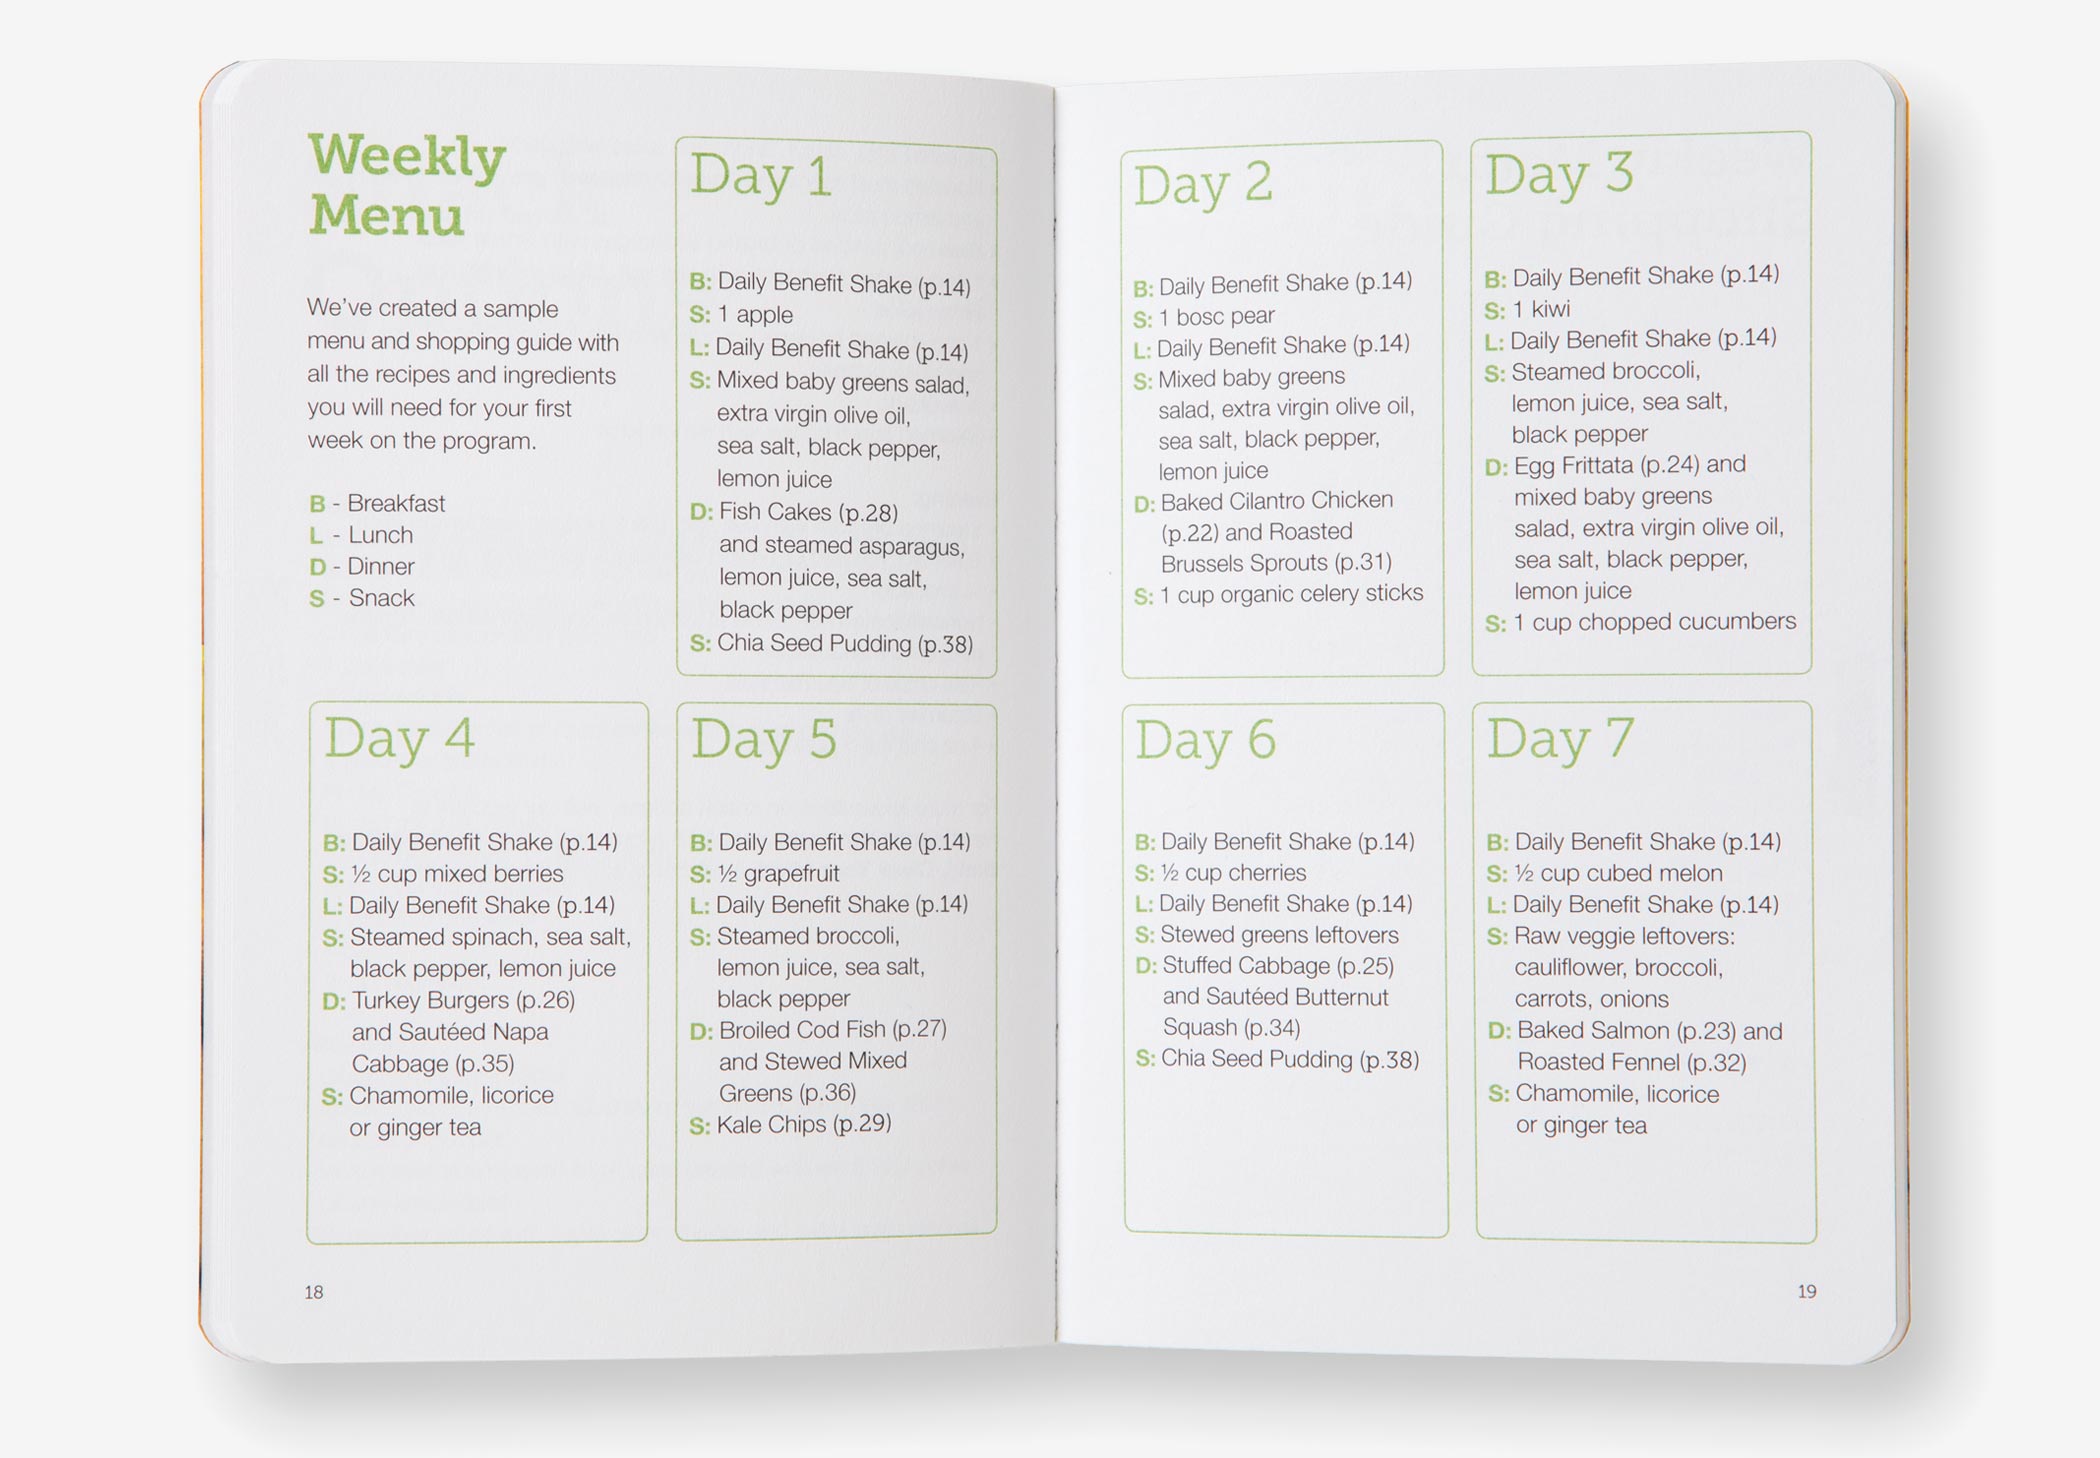 The weekly menu pages from the Dr. Morrison Daily Benefit Program Guide with boxed sections for each day's schedule.